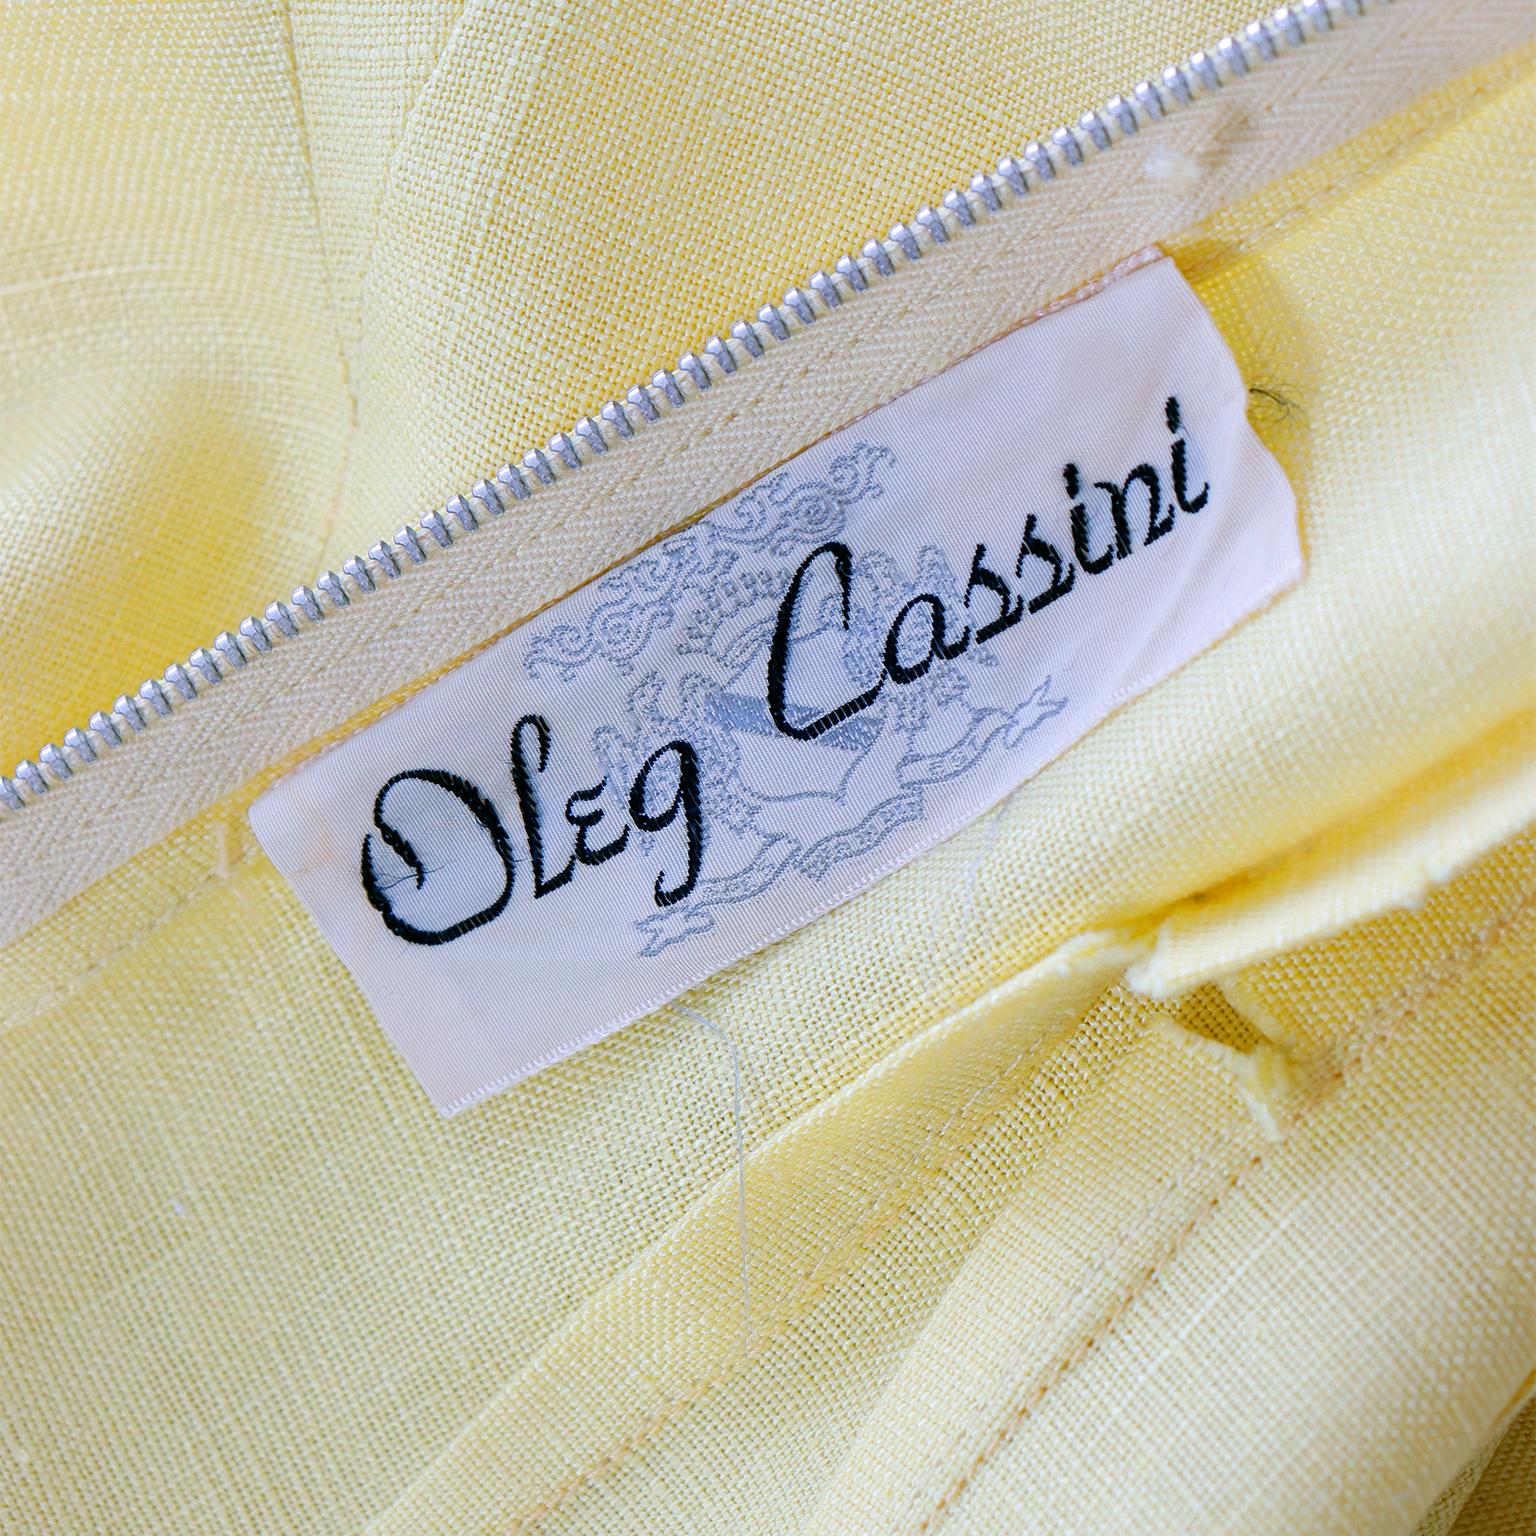 1958 Oleg Cassini Vintage Yellow Red & Green Linen Dress w Laced Bodice For Sale 6